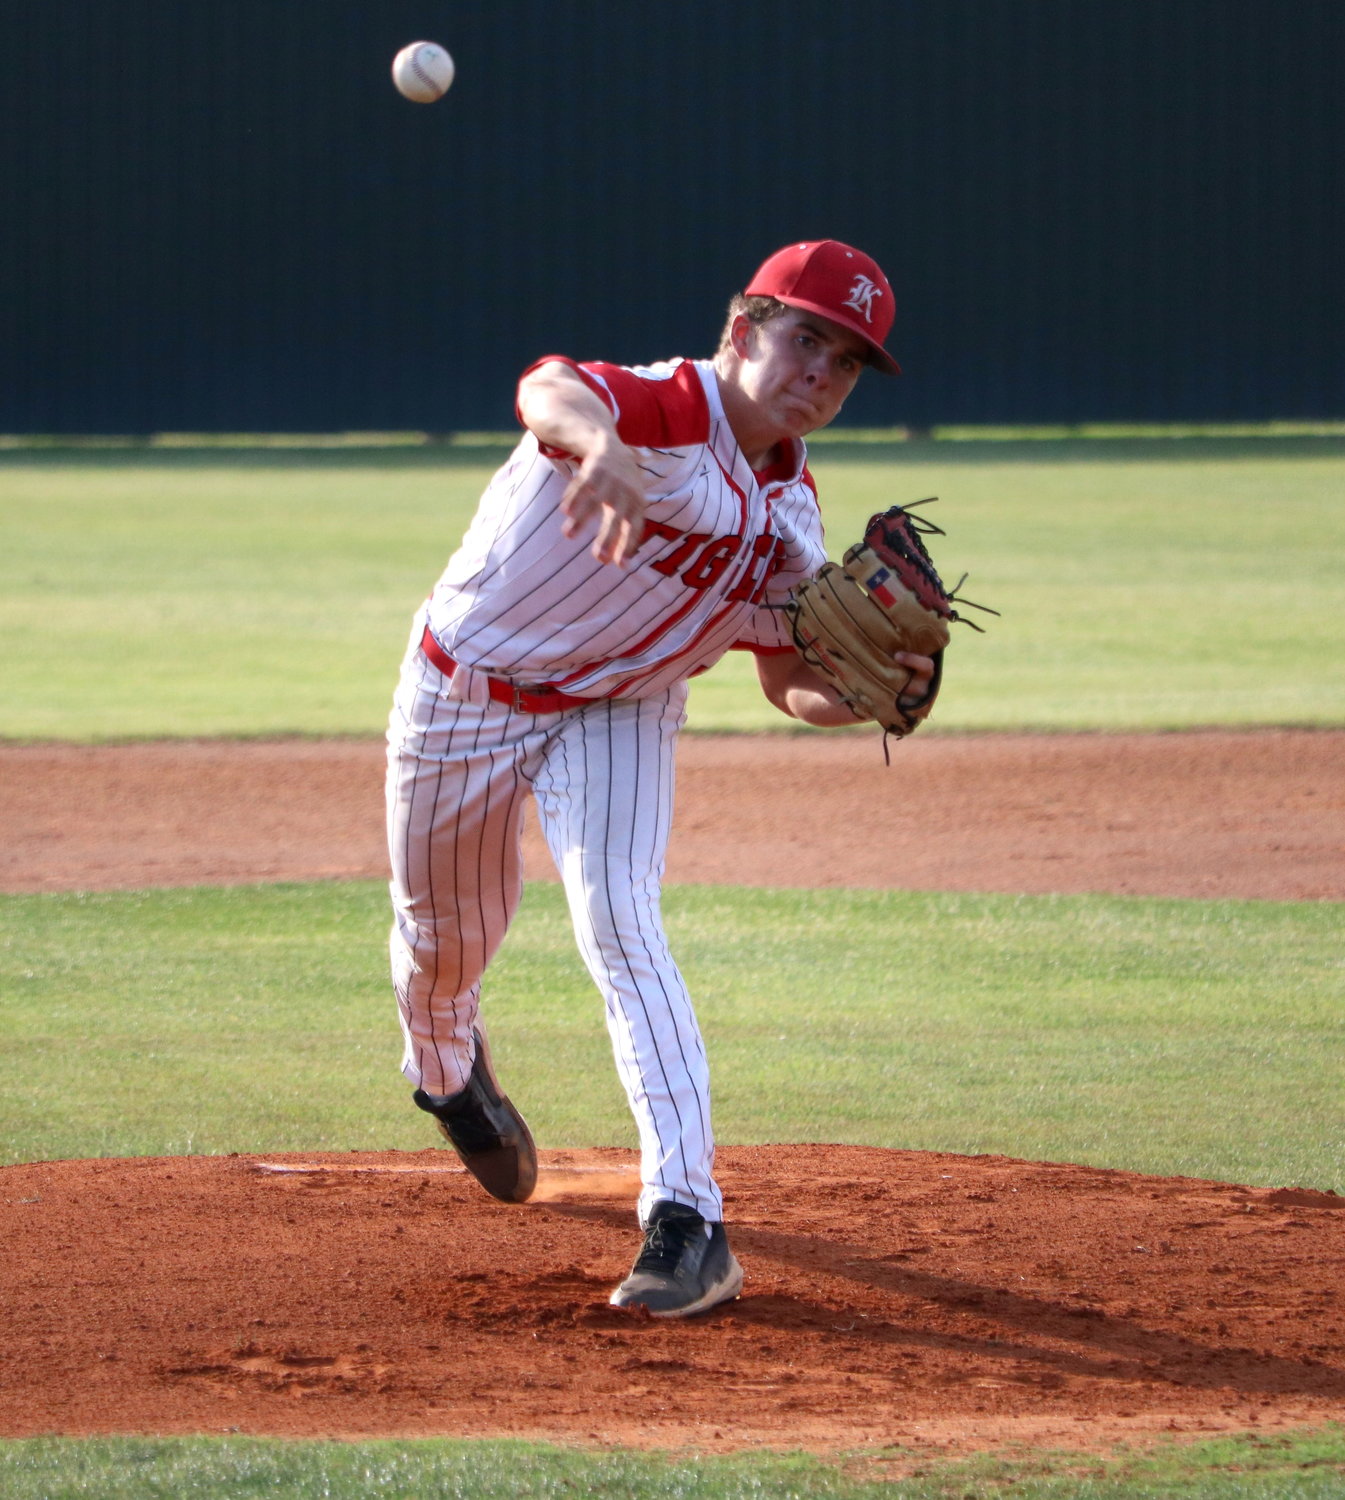 Caleb Koger pitches during Friday’s area round game between Katy and Jersey Village at the Katy baseball field.